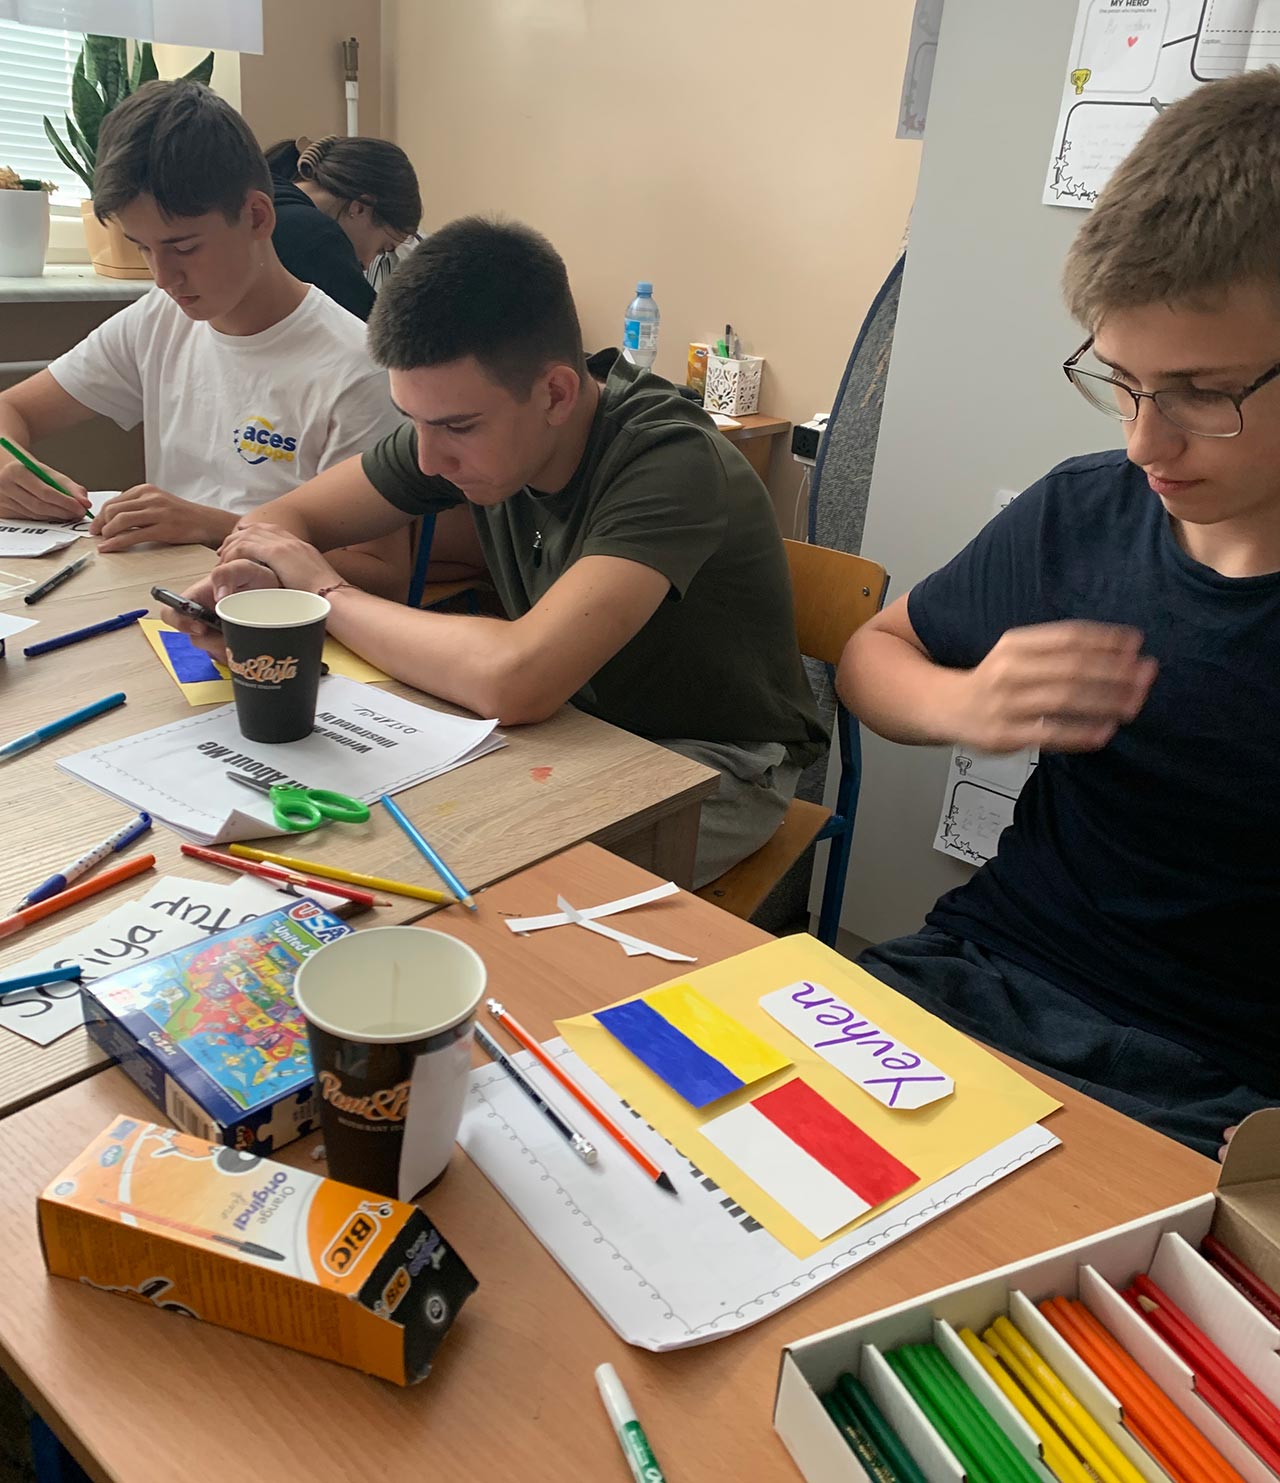 Students in Syracuse TA member Jean-Pierre Rosas’s group decorate graduation caps with flags representing the nations of students and camp counselors at a summer camp for Ukrainian and Polish students in Cieszanów, Poland.